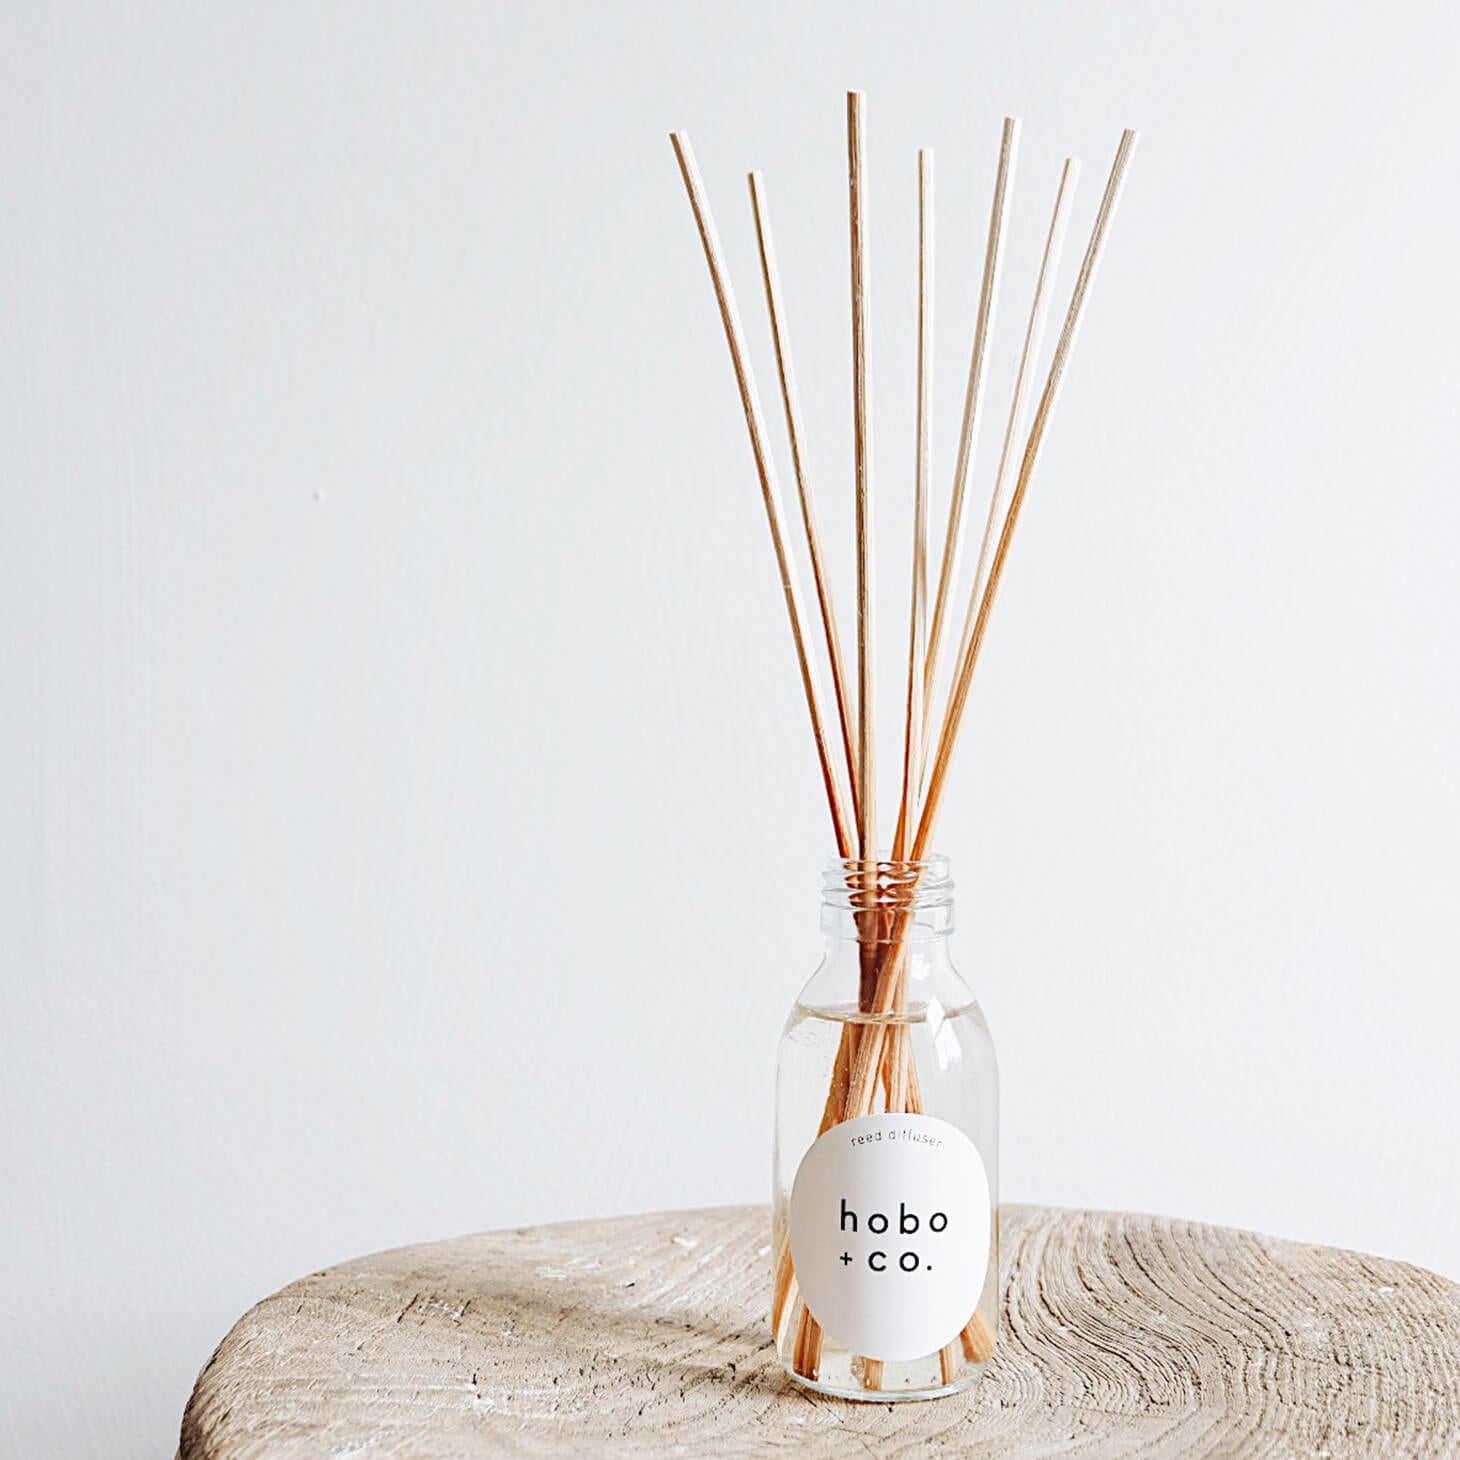 Hobo + Co. Orange Spice Reed Diffuser - Osmology Scented Candles & Home Fragrance